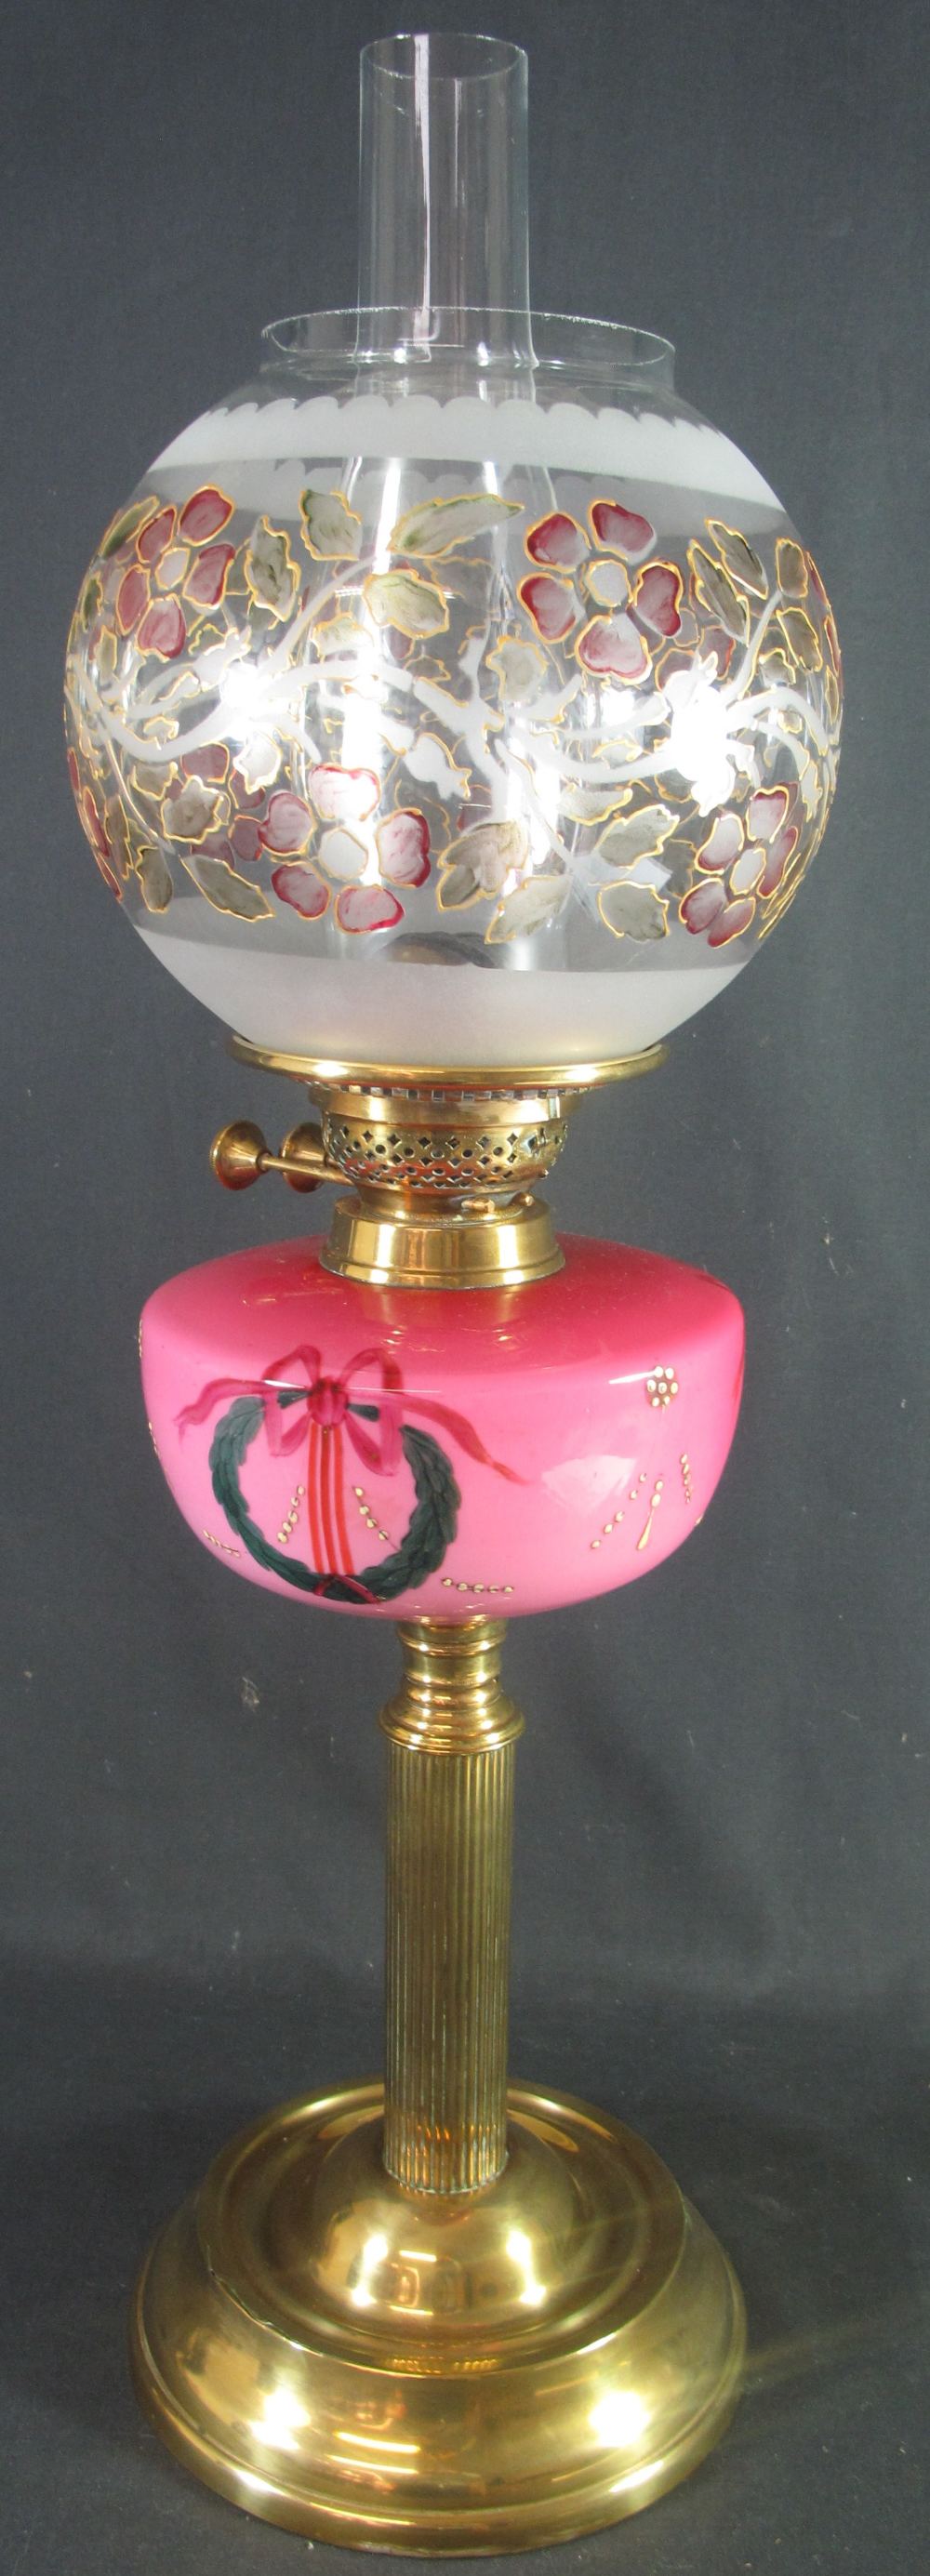 EARLY 20TH CENTURY BRASS DOUBLE BURNER OIL LAMP with pink ceramic reservoir, having painted enamel